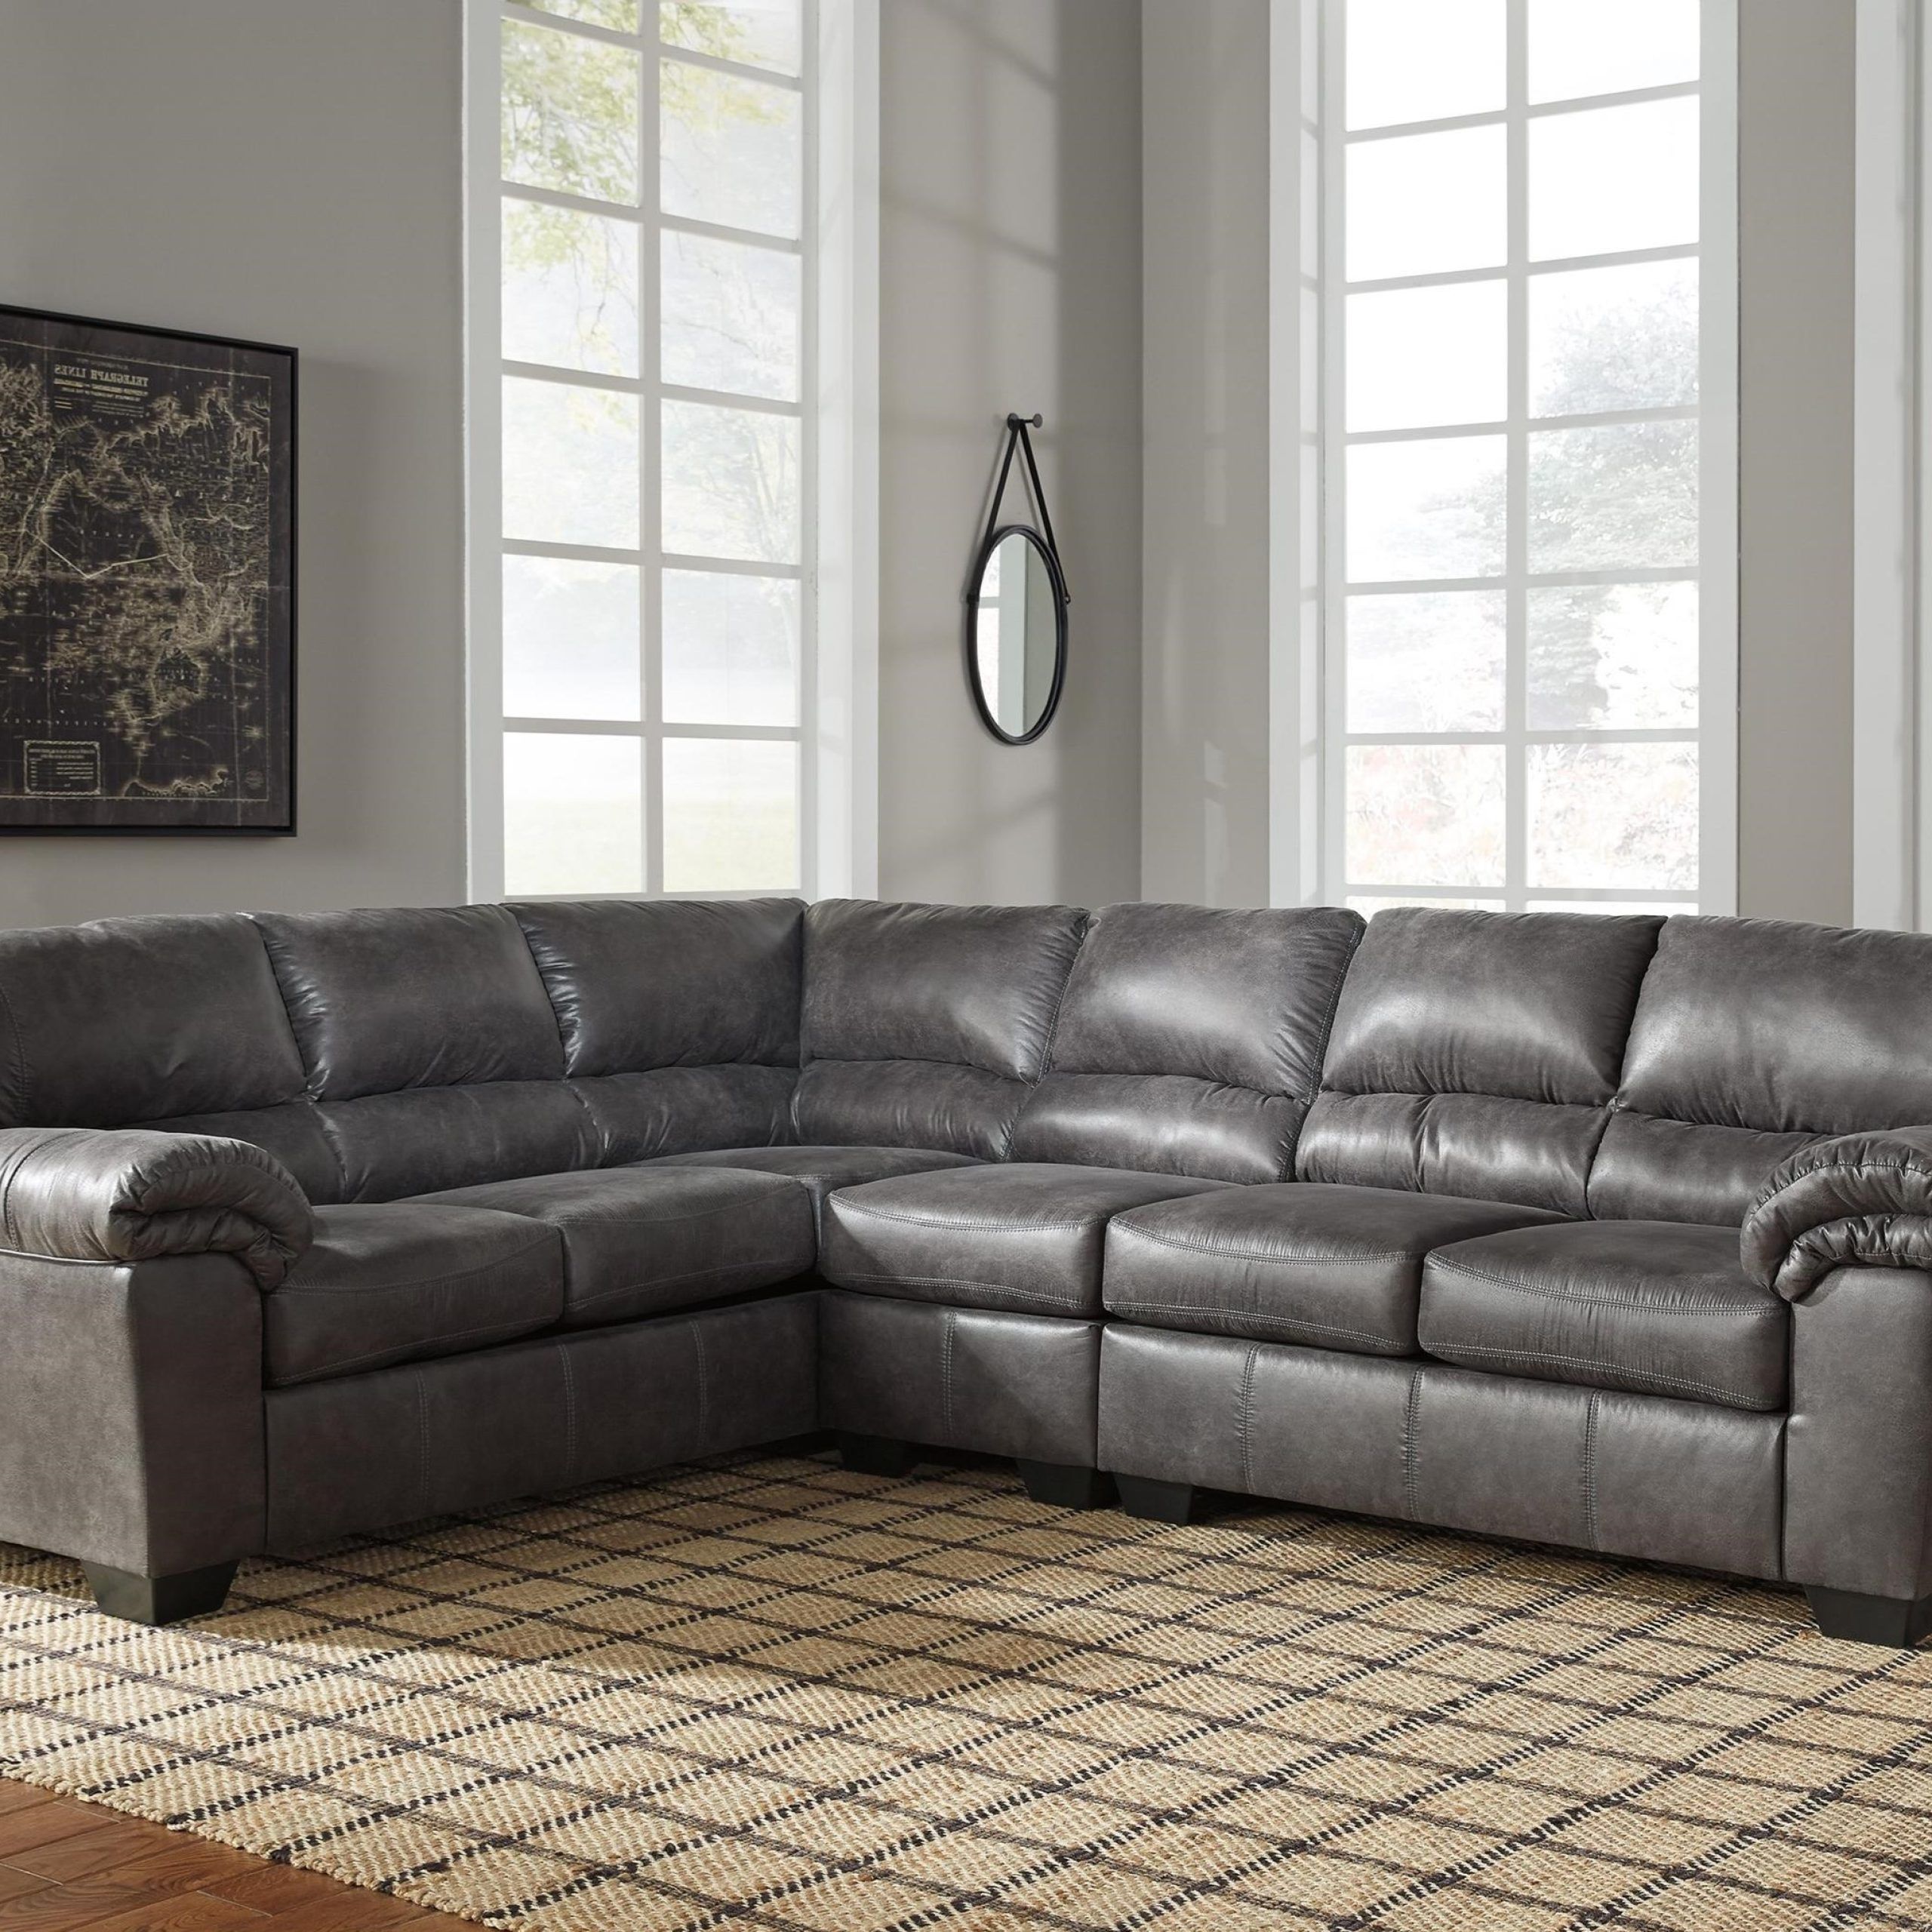 Signature Designashley Bladen 3 Piece Faux Leather Sectional Within Well Known 3 Piece Leather Sectional Sofa Sets (Photo 5 of 15)